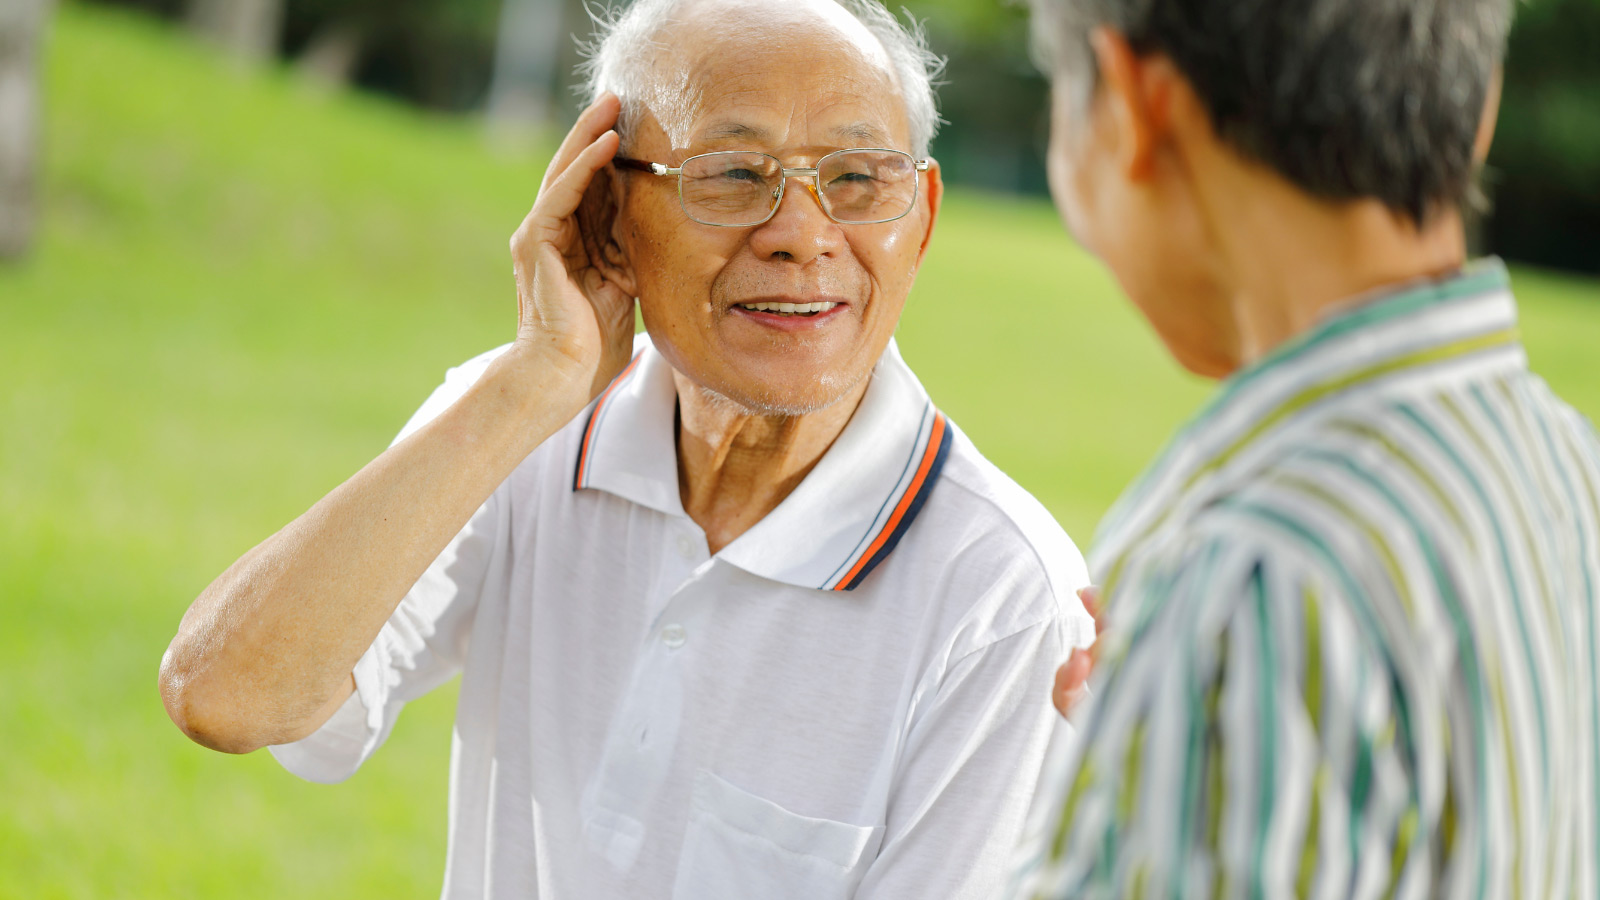 The Connection of Hearing Loss and Dementia